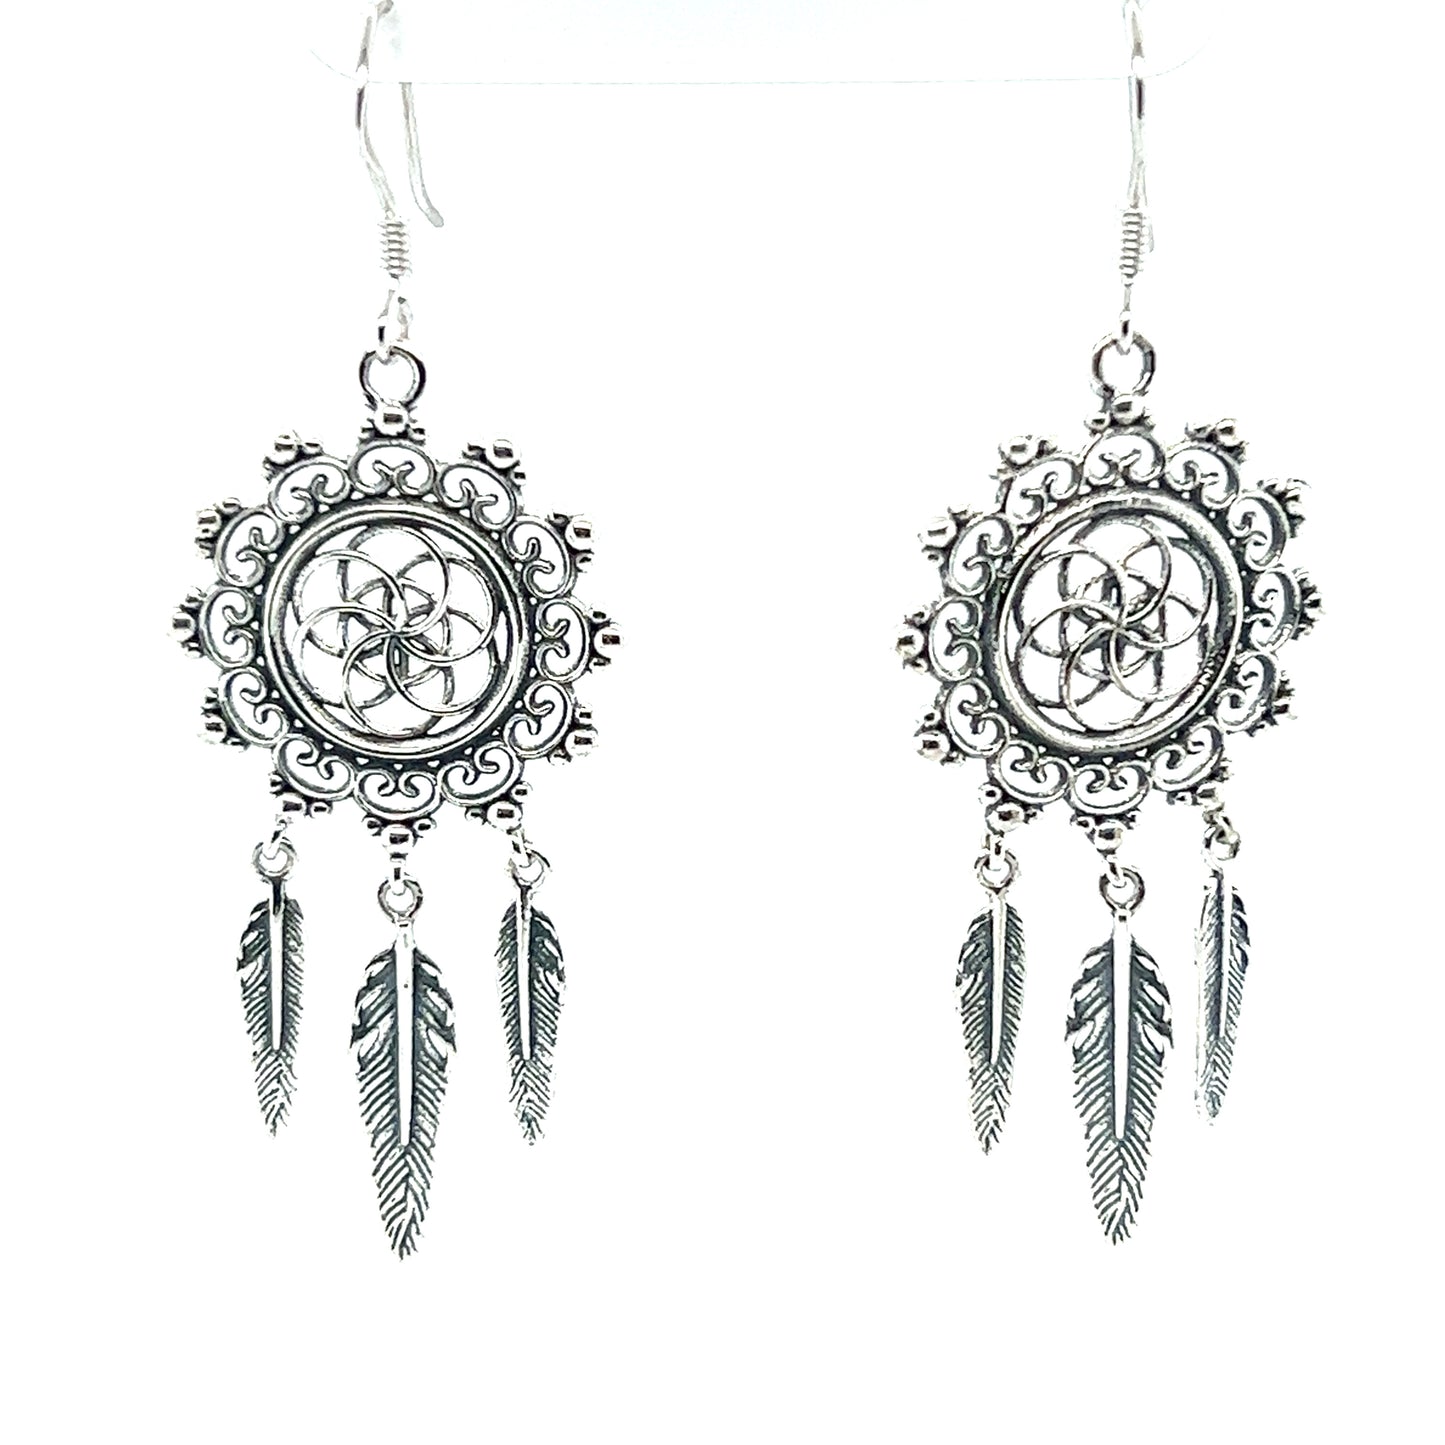 A pair of Super Silver Dreamcatcher Earrings With The Flower Of Life Symbol crafted in silver with delicately adorned feathers.